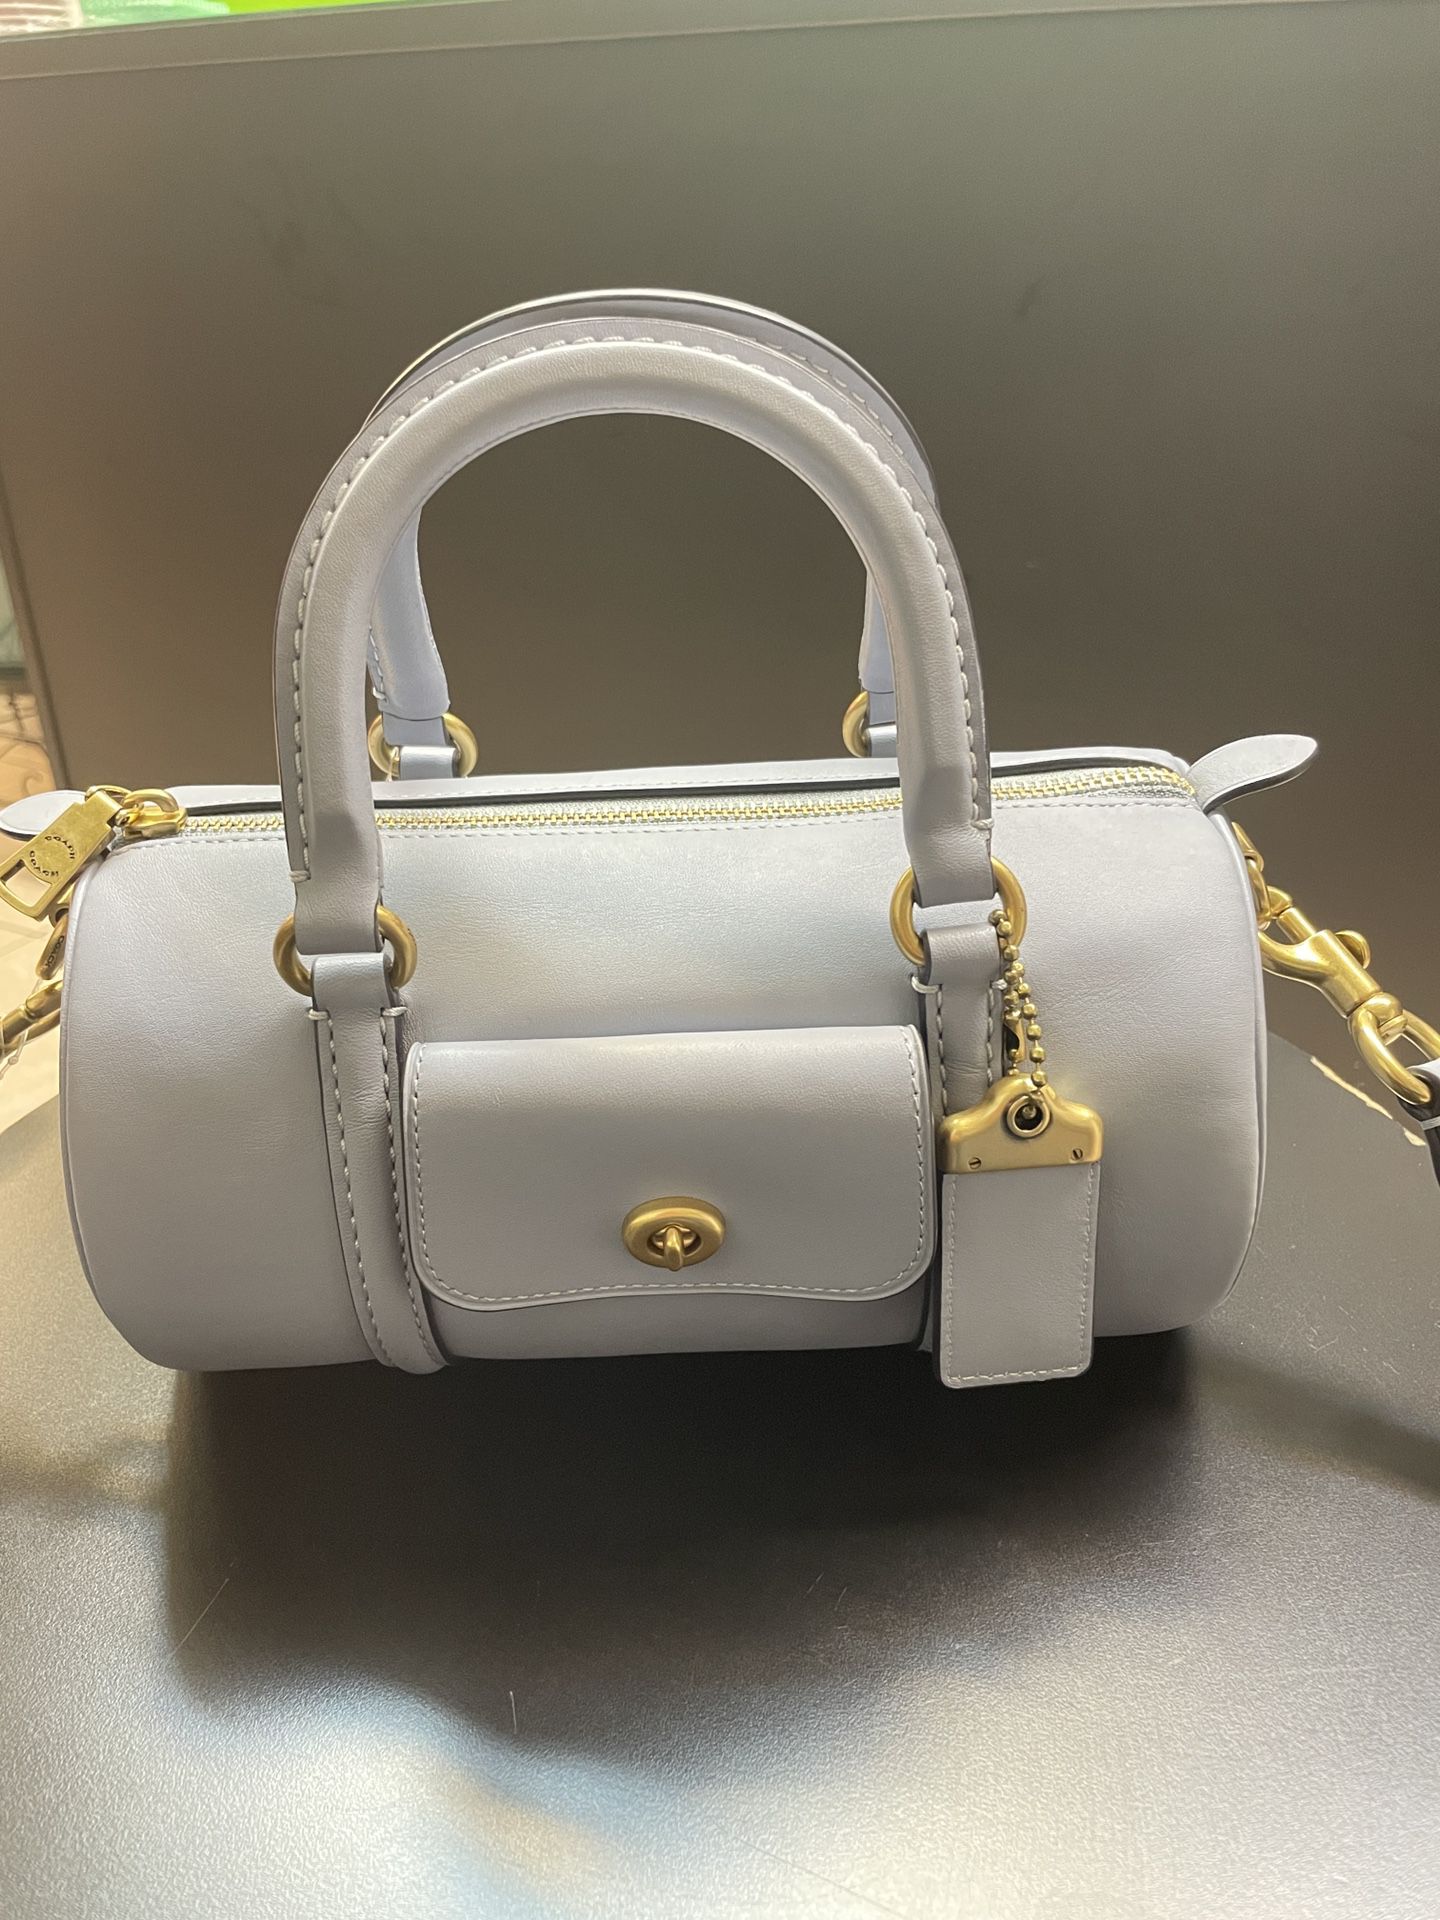 Authentic Coach Mini Sierra Satchel In Signature NWT. for Sale in Alhambra,  CA - OfferUp